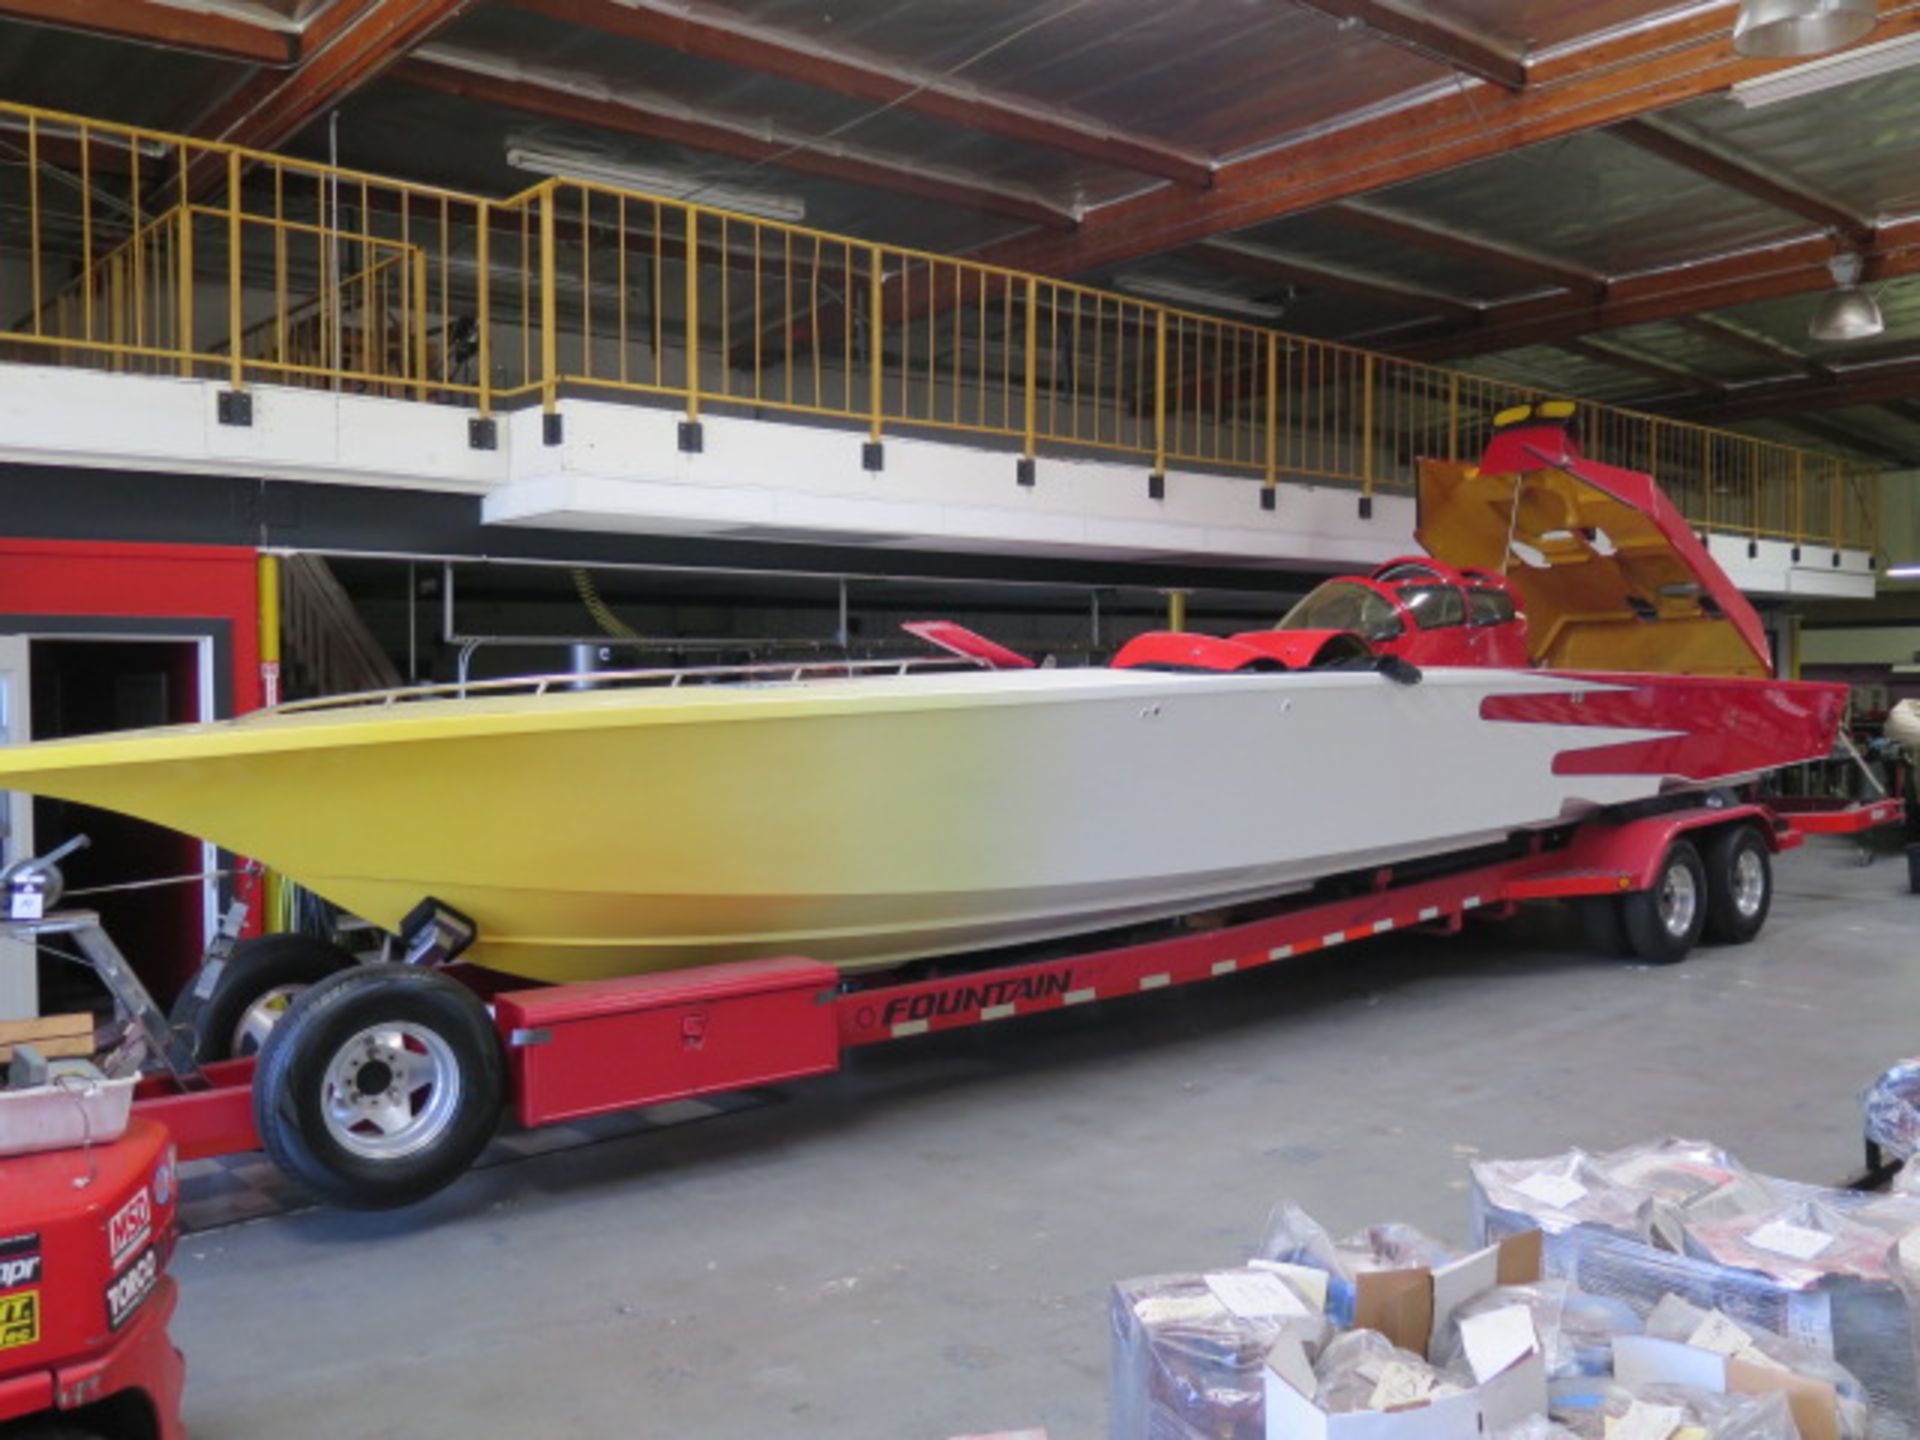 42’ Fountain Super V Race Boat w/ Fill Canopy (Former Worlds Fastest Super V Hull)142.3, SOLD AS IS